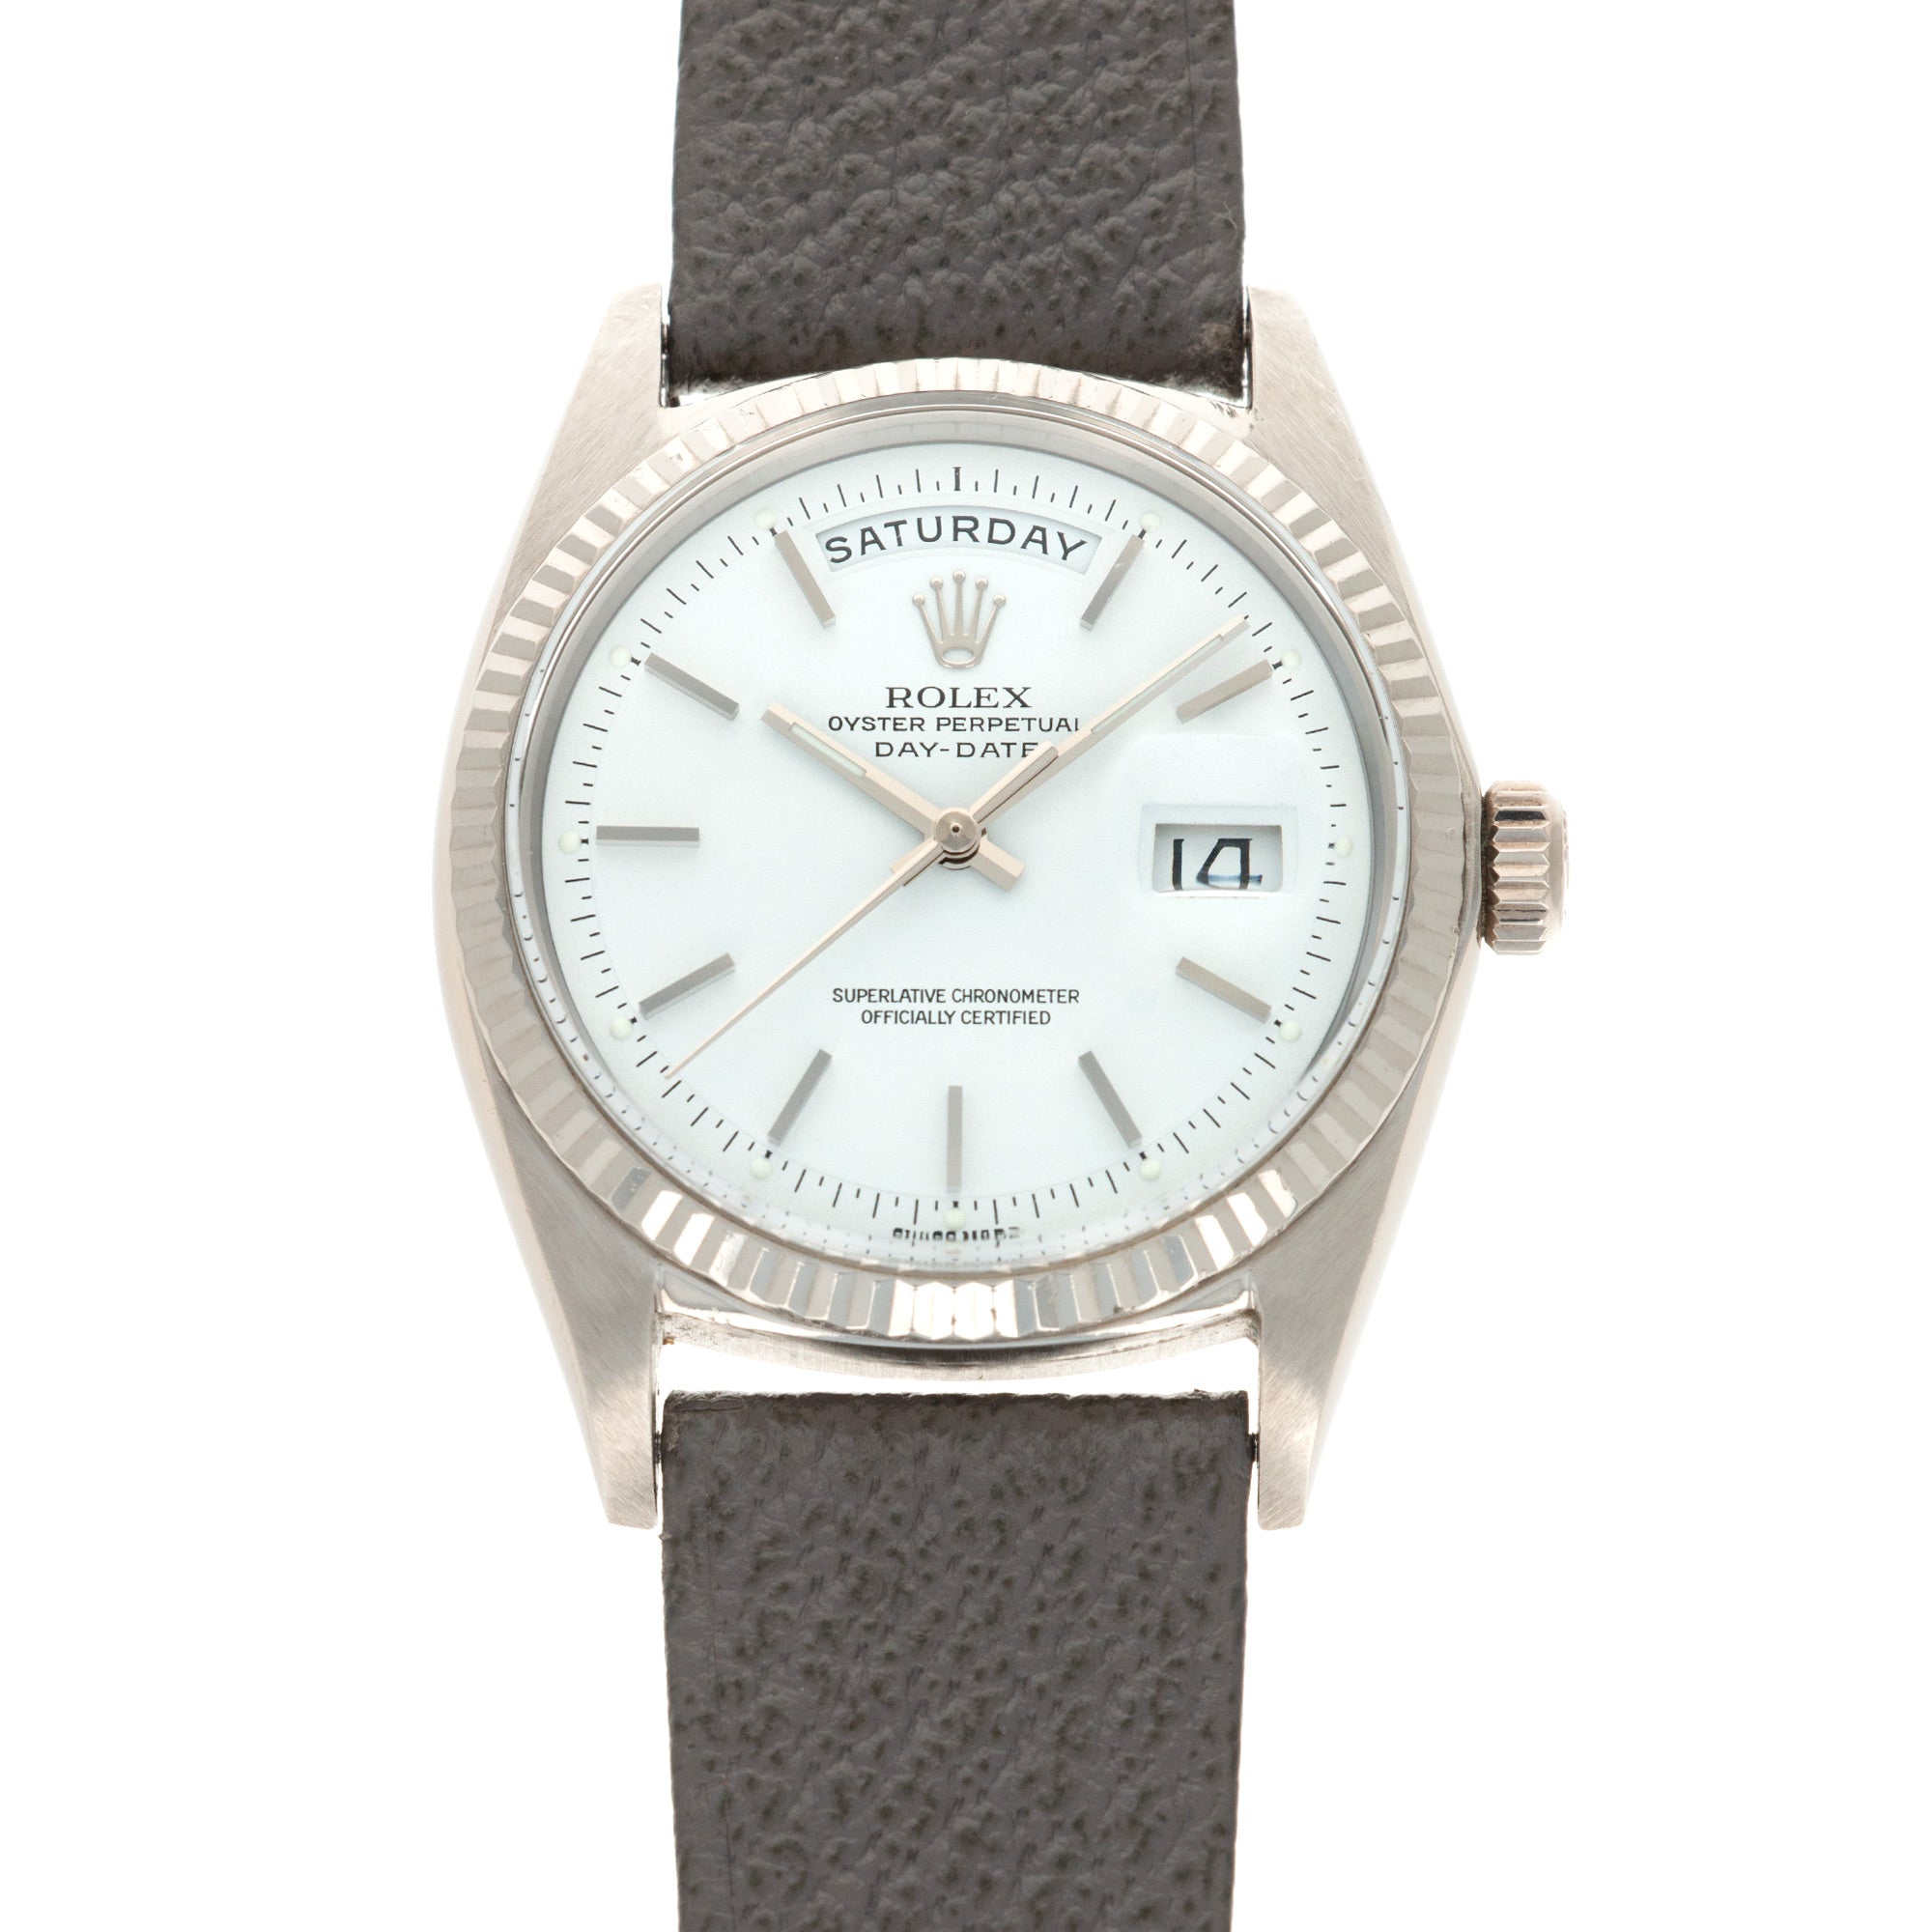 Rolex - Rolex White Gold Day-Date 1803, 1969 - The Keystone Watches